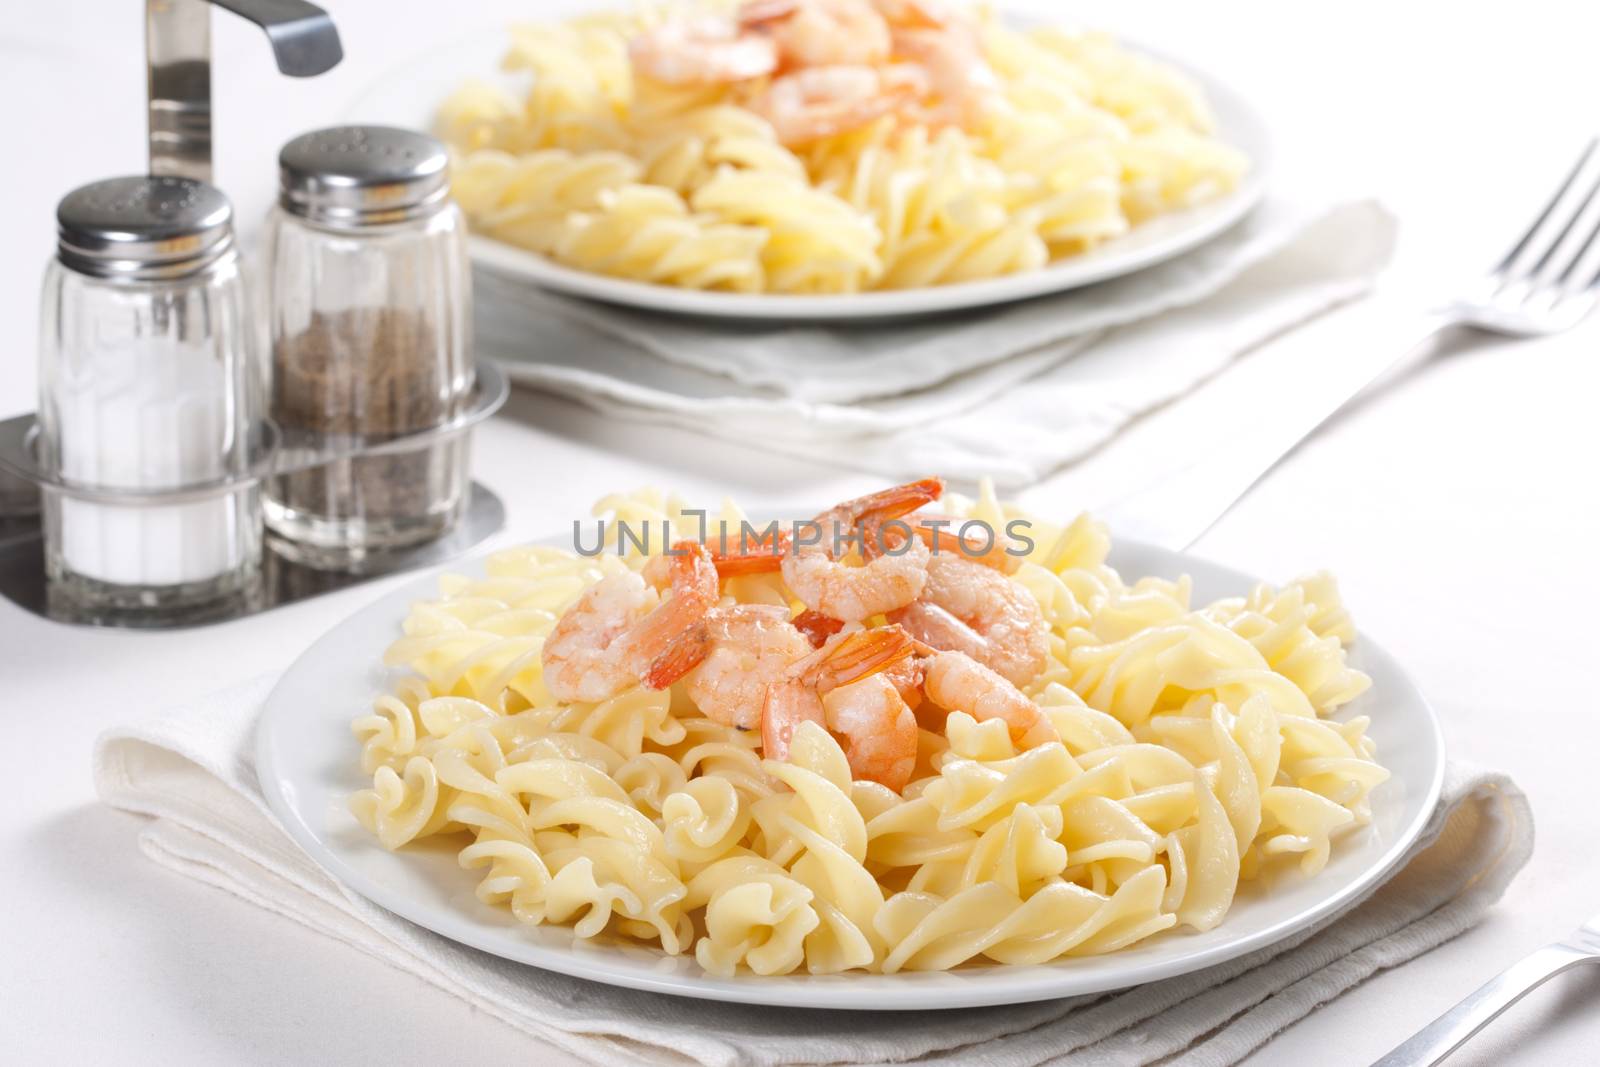 Two plates of pasta with shrimps